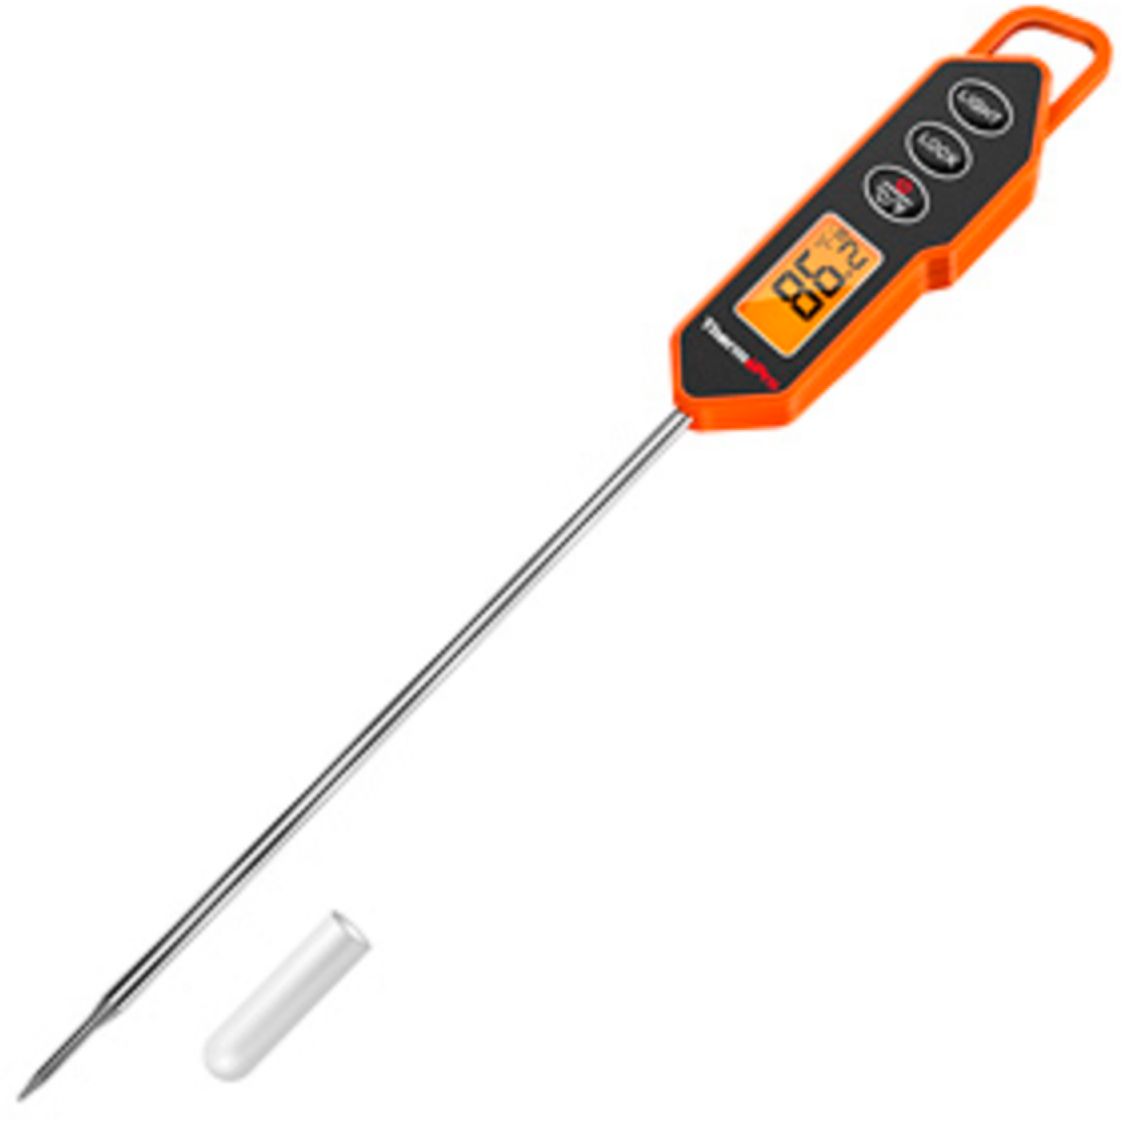 Angle View: ThermoPro - Digital Instant-Read Meat Thermometer - ORANGE